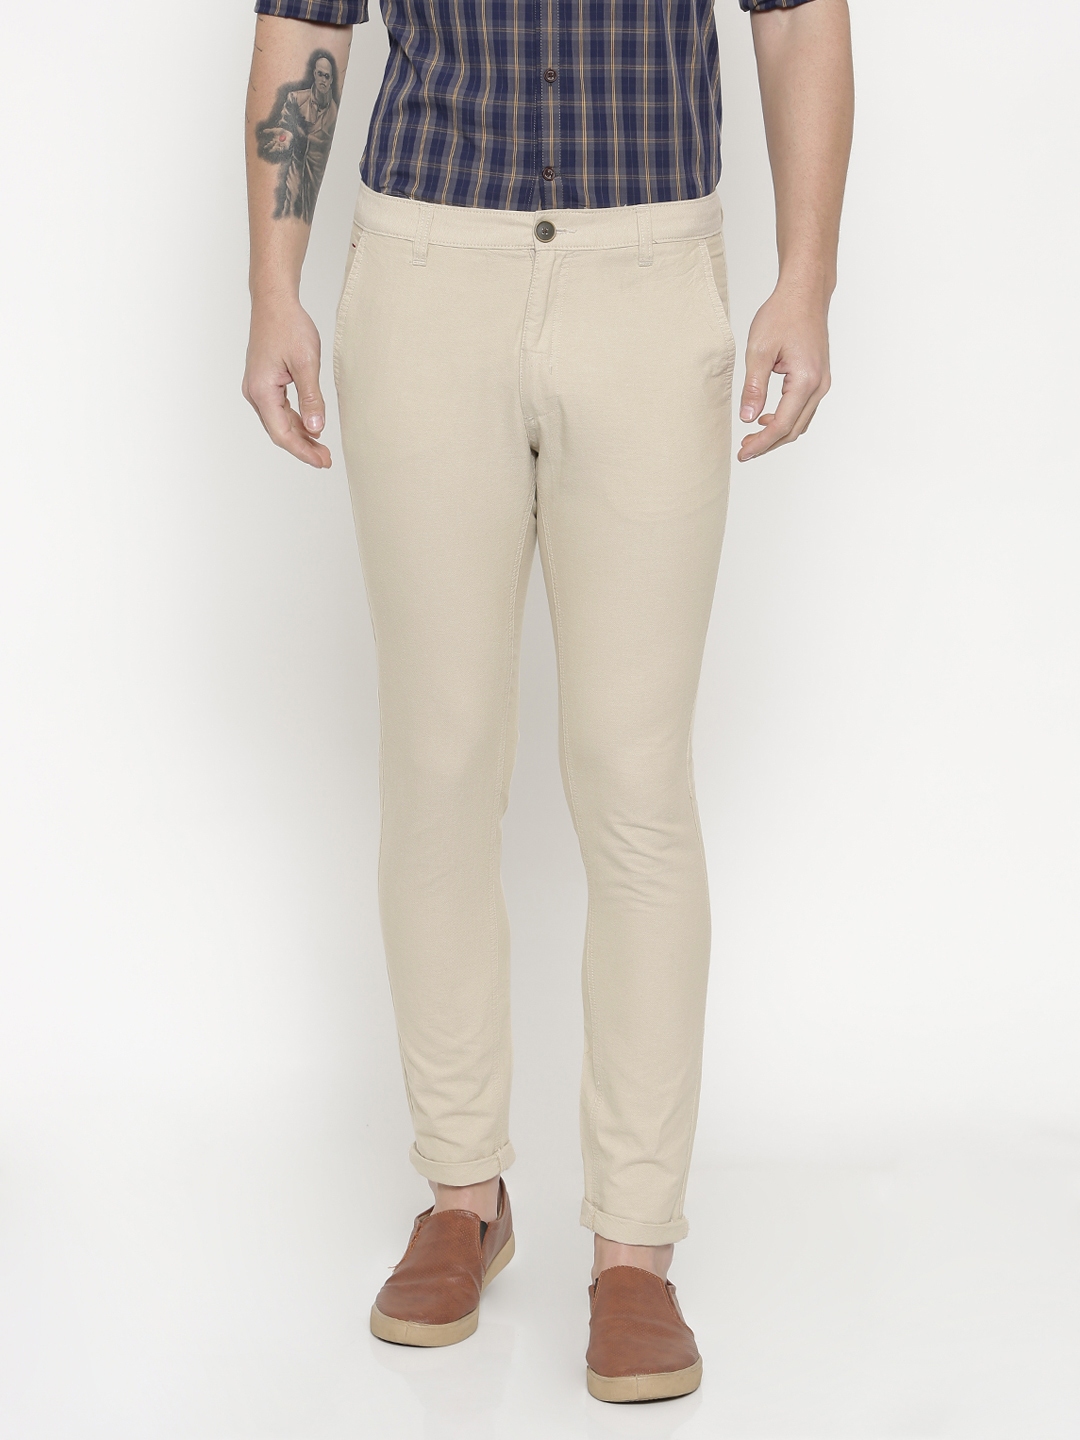 Solid Beige Relaxed Fit Cotton Pants - Vishnu